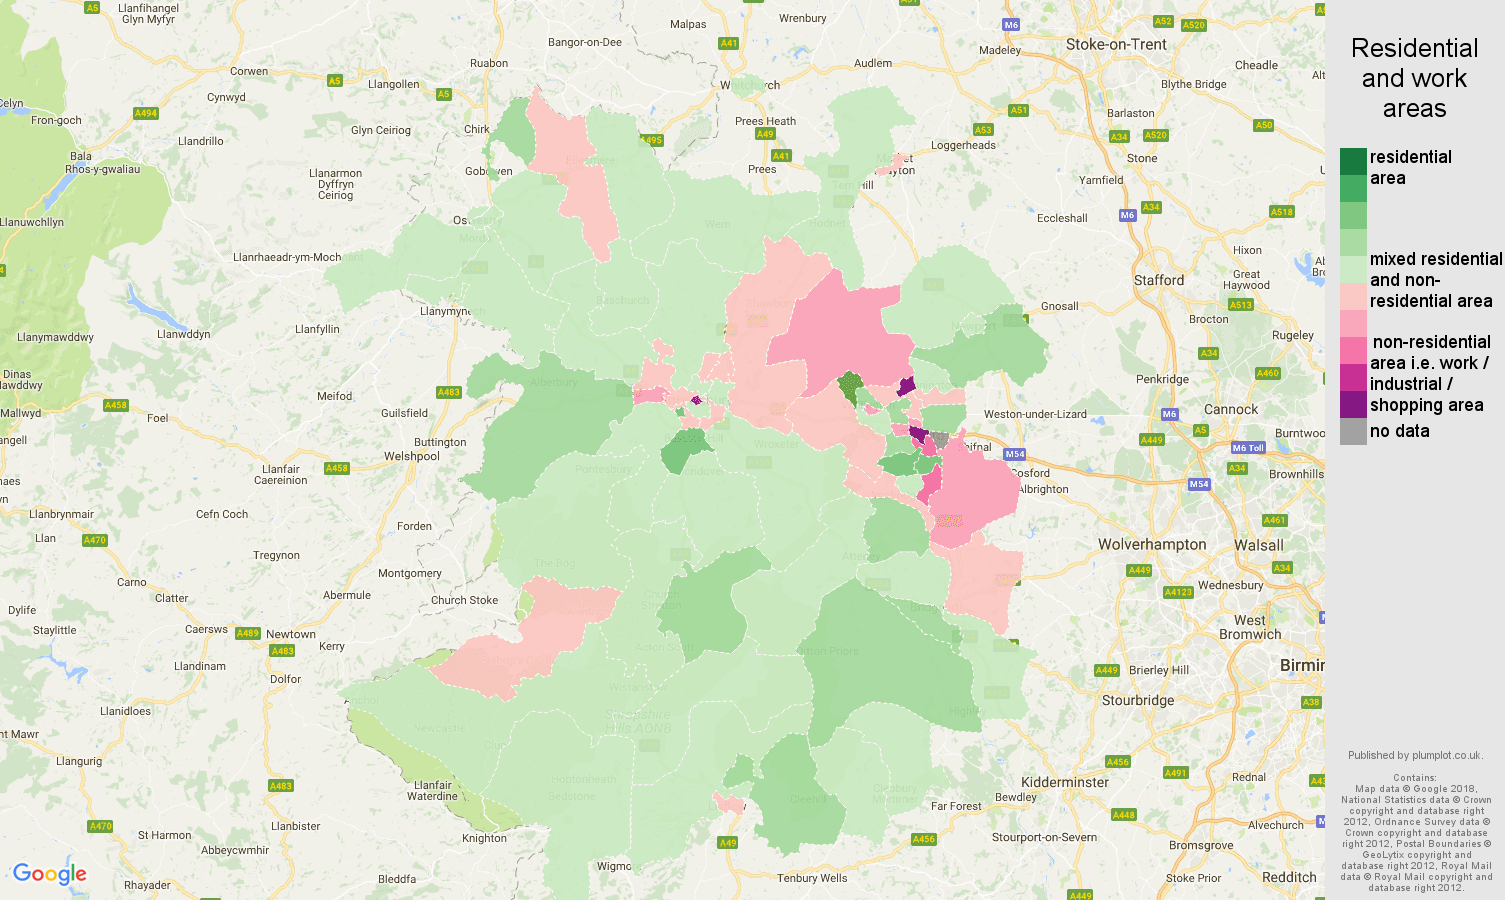 Shropshire residential areas map